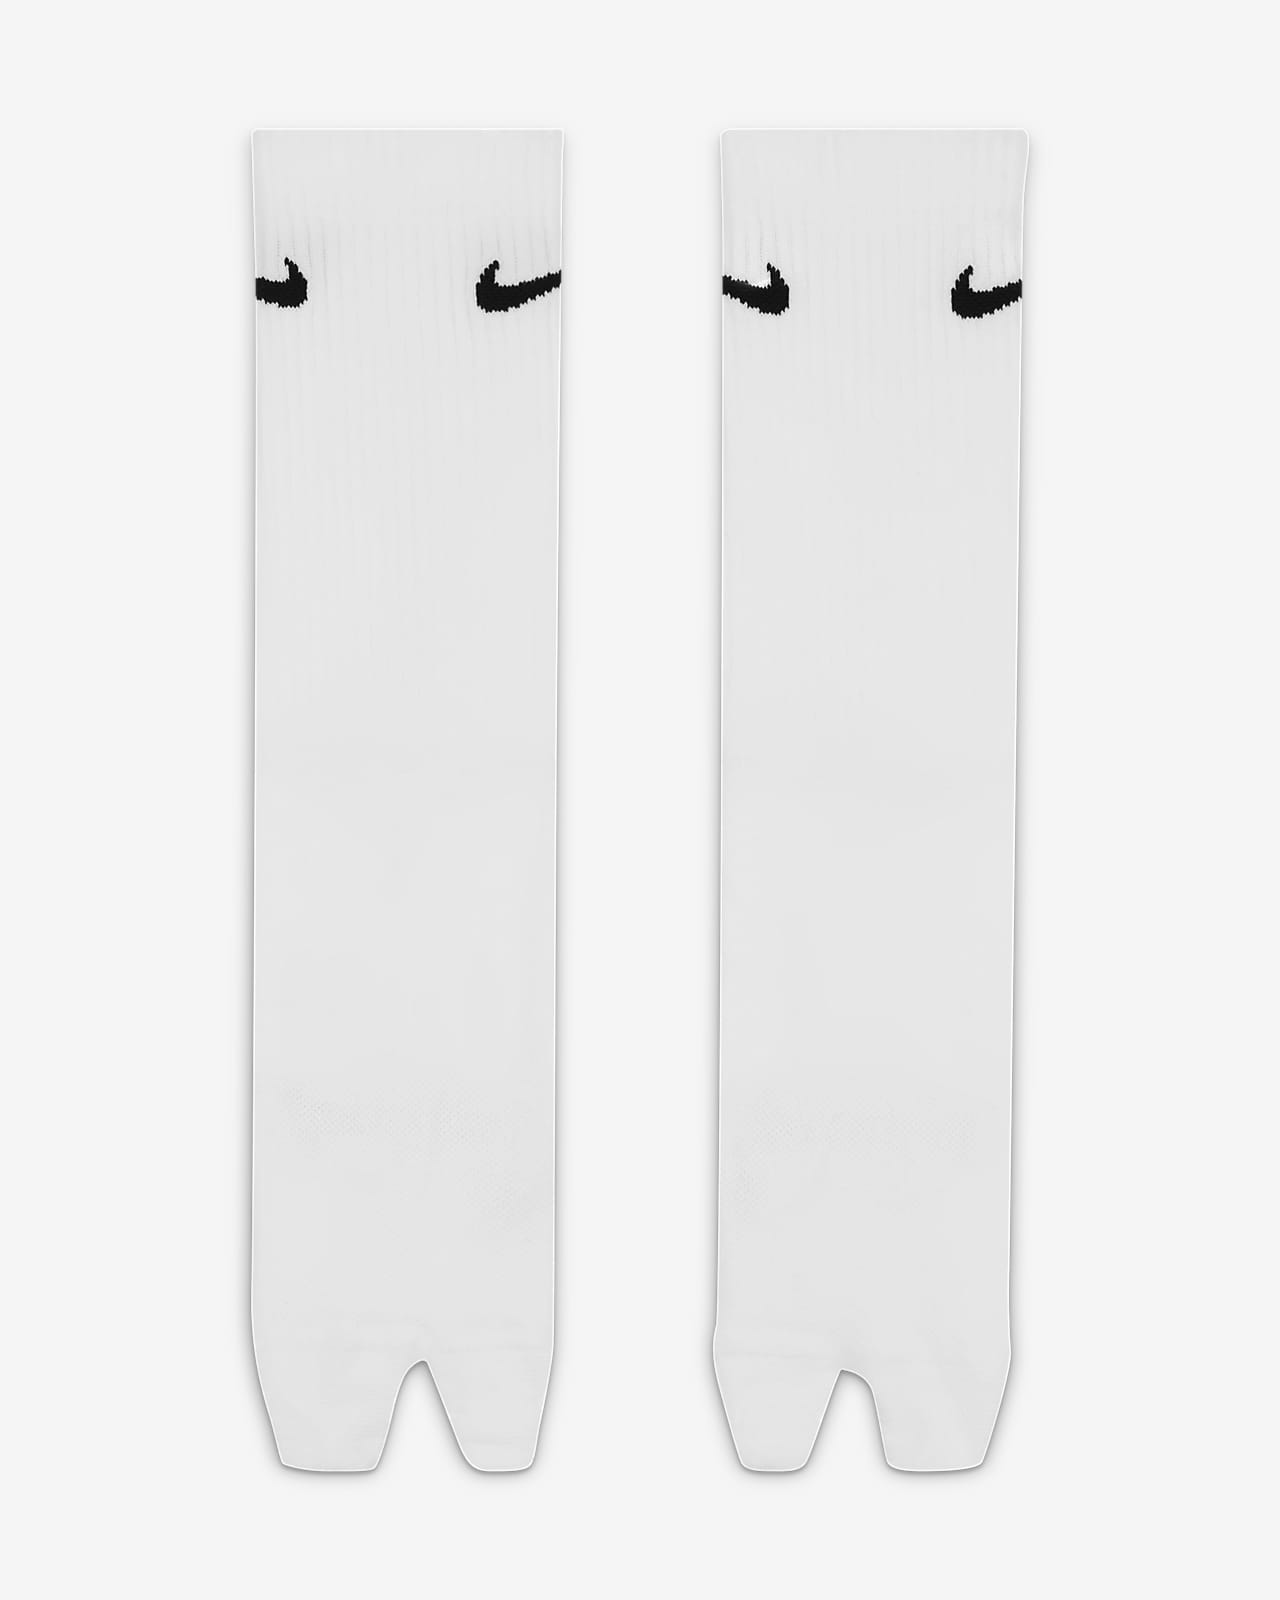 CHAUSSETTES NIKE EVERYDAY MI-MOLLET Couleur WHITE/BLACK CHAUSSURES